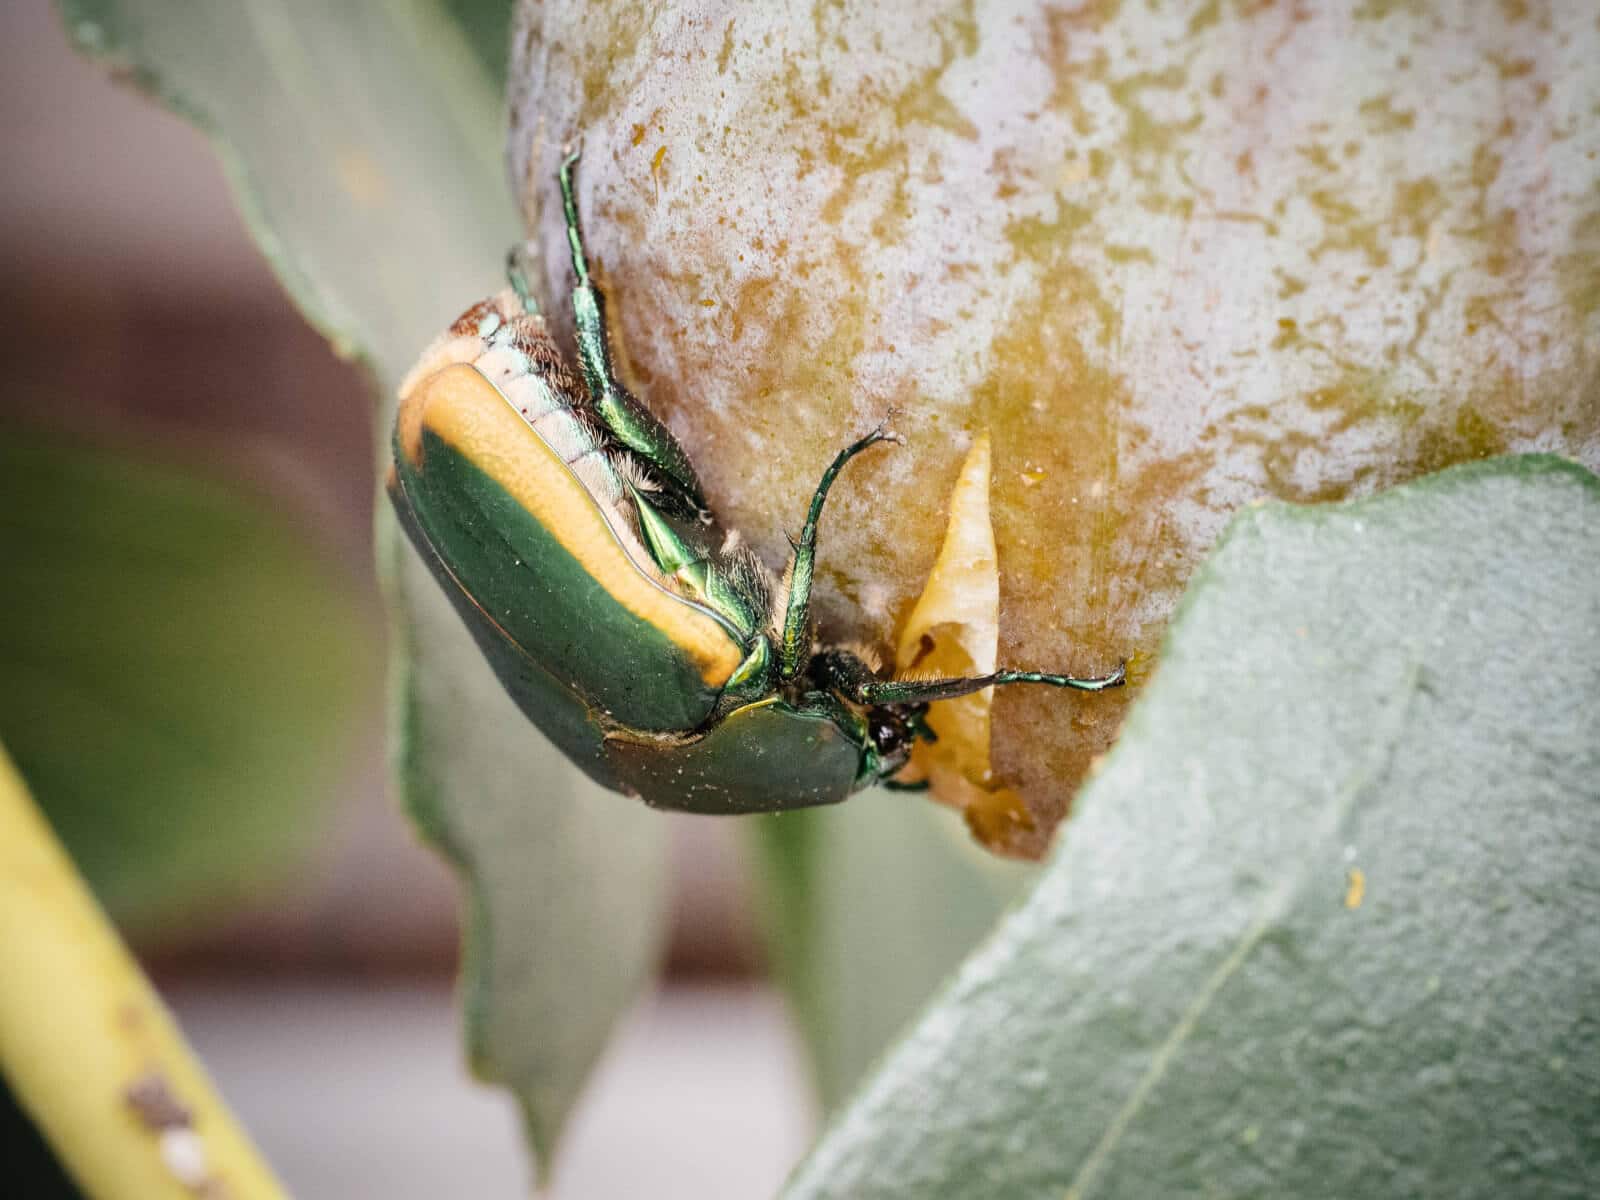 Figeater beetles are attracted to soft, overripe fruit with thin skins